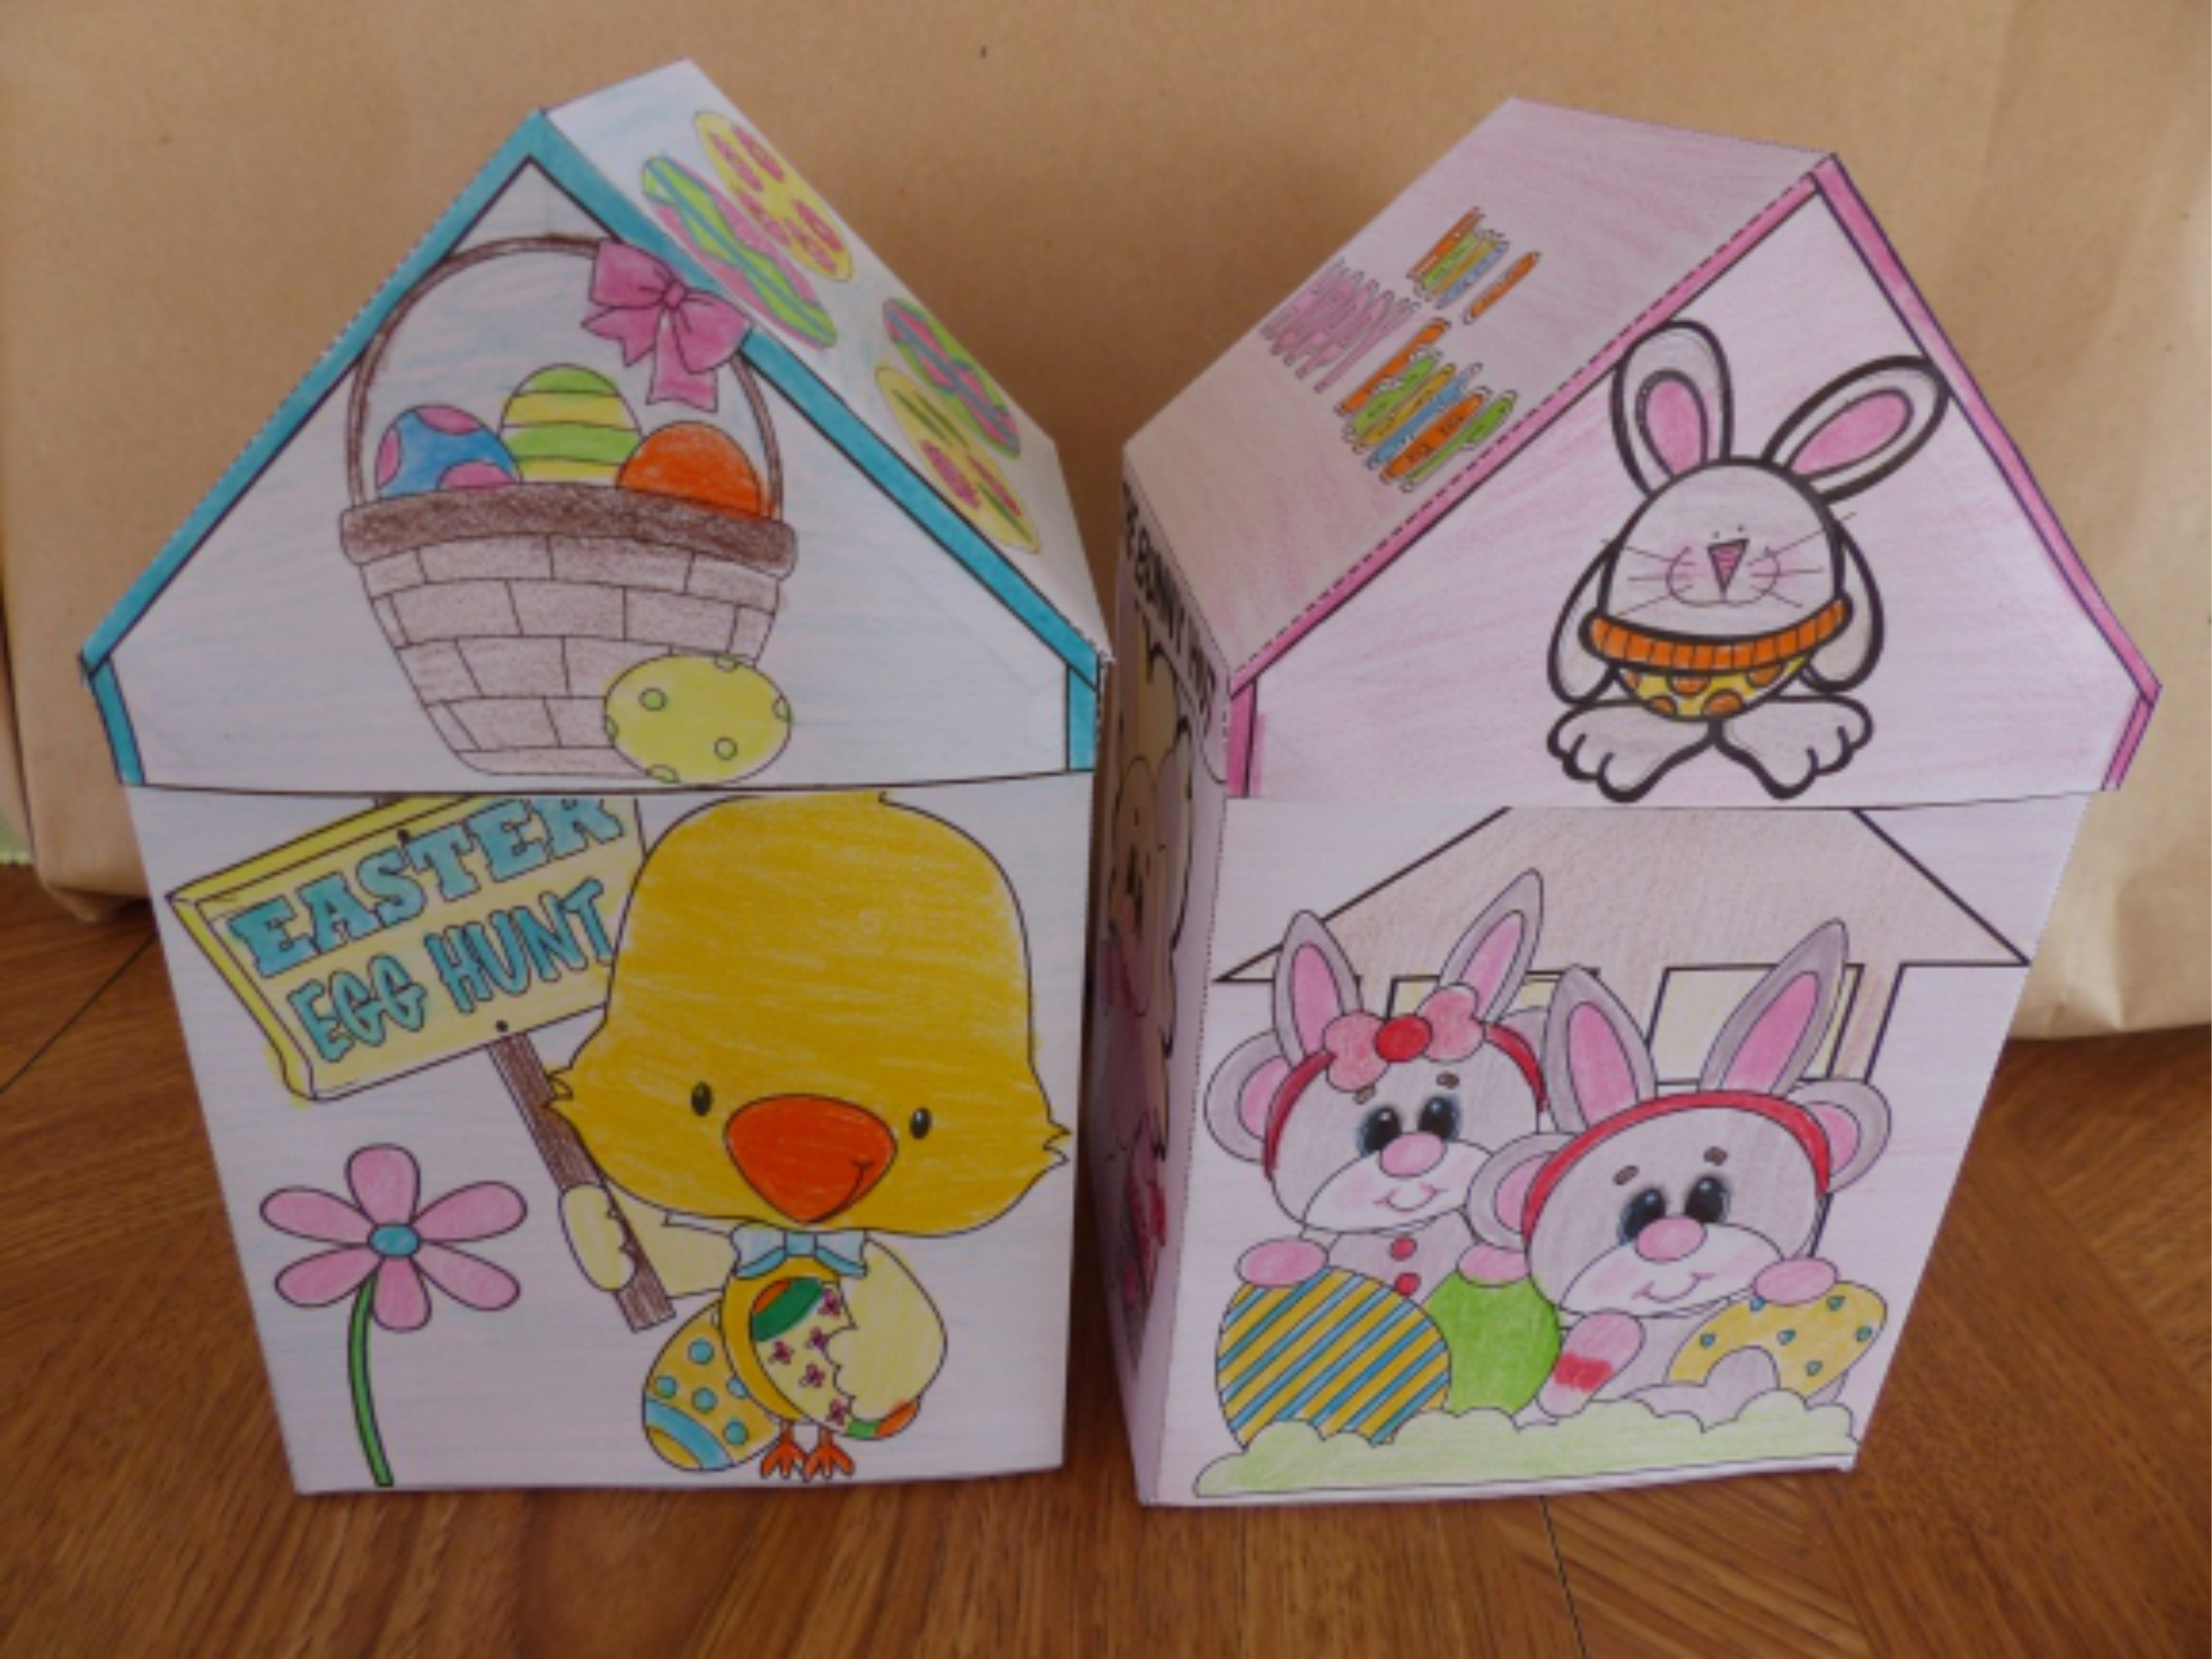 Easter Crafts - The Easter Egg Hut & The Bunny Hut